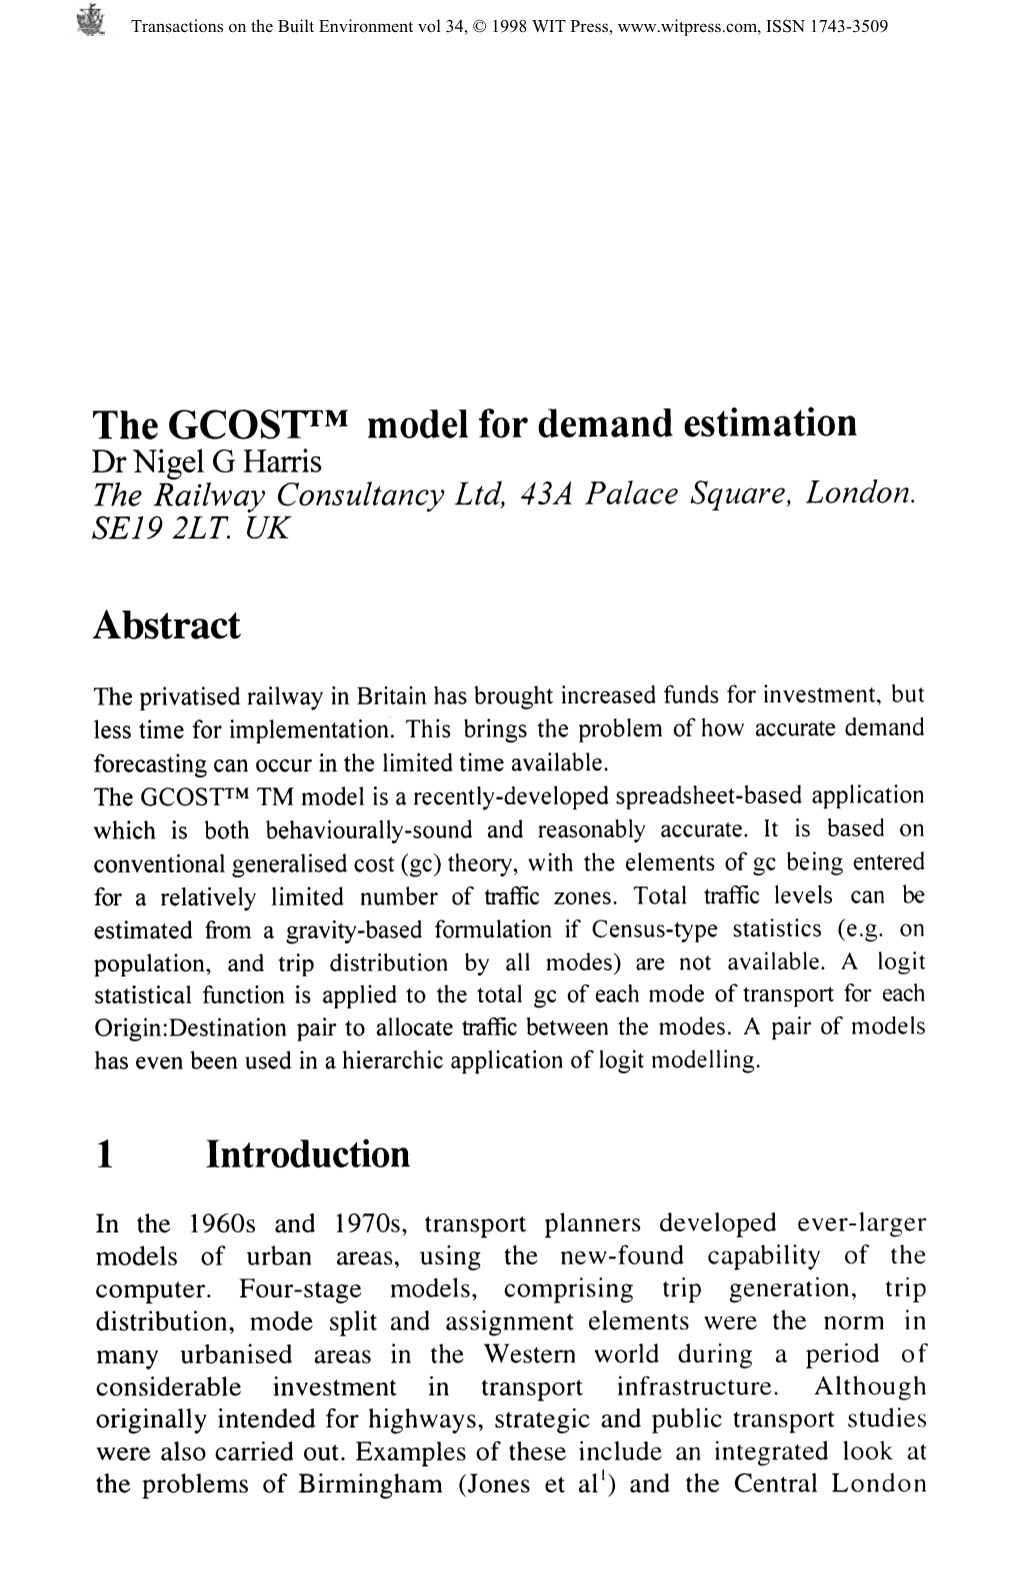 The GCOST™ Model for Demand Estimation Dr Nigel G Harris The